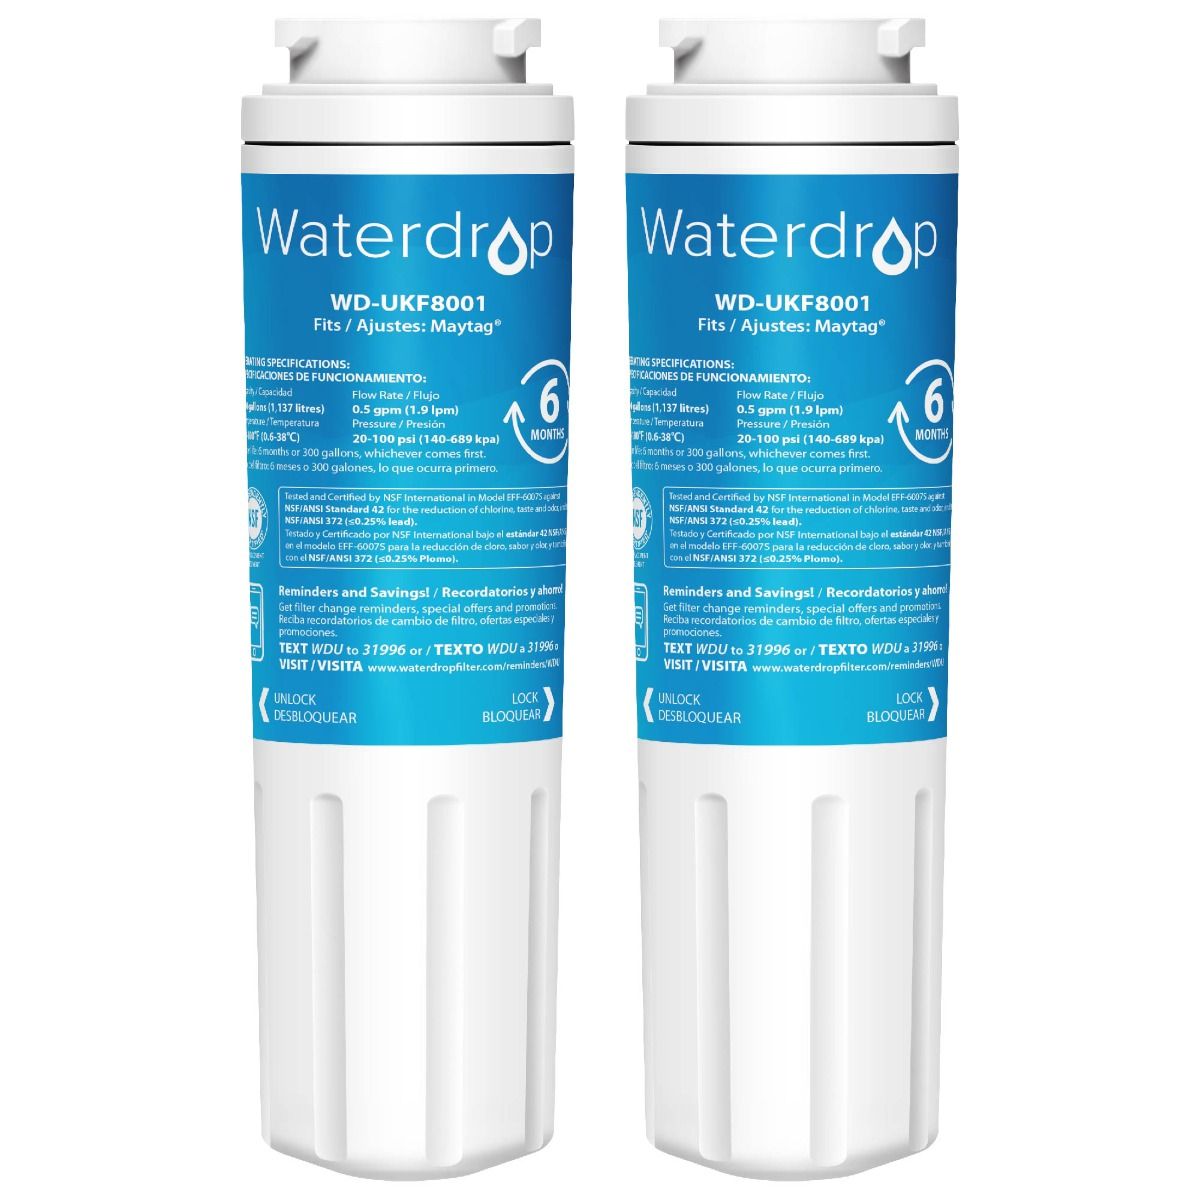 Waterdrop Ukf8001 Refrigerator Water Filter 4, Replacement for Whirlpo